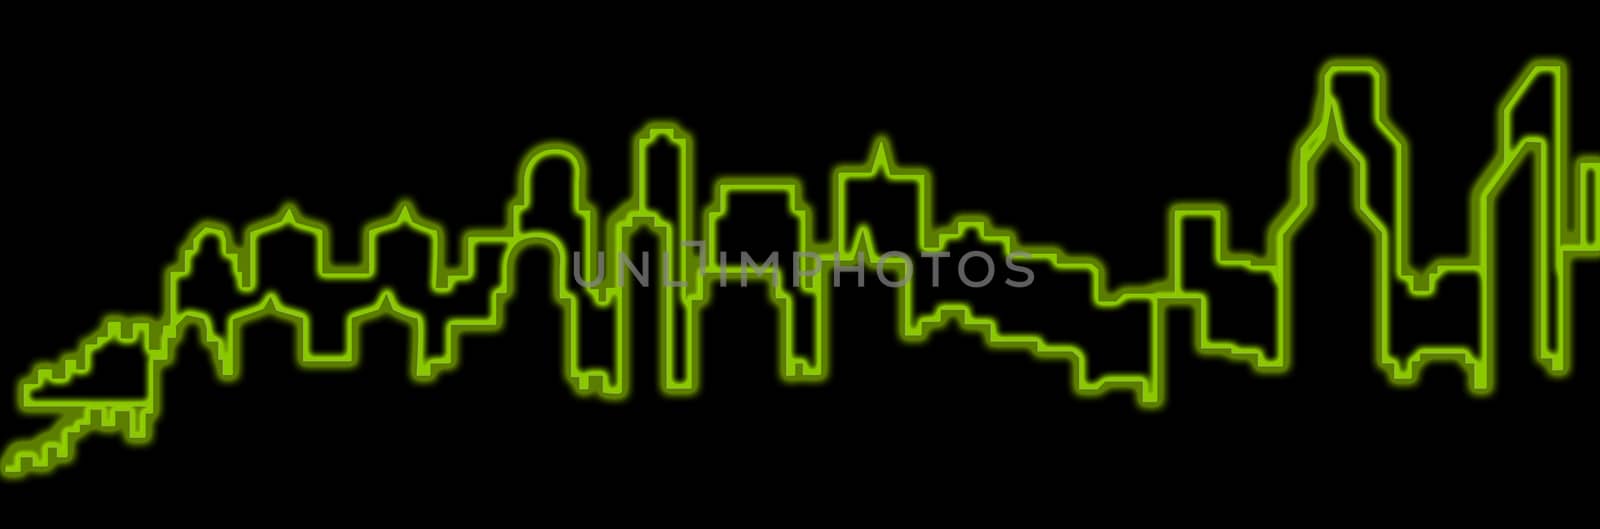 neon skyline city with black background by compuinfoto